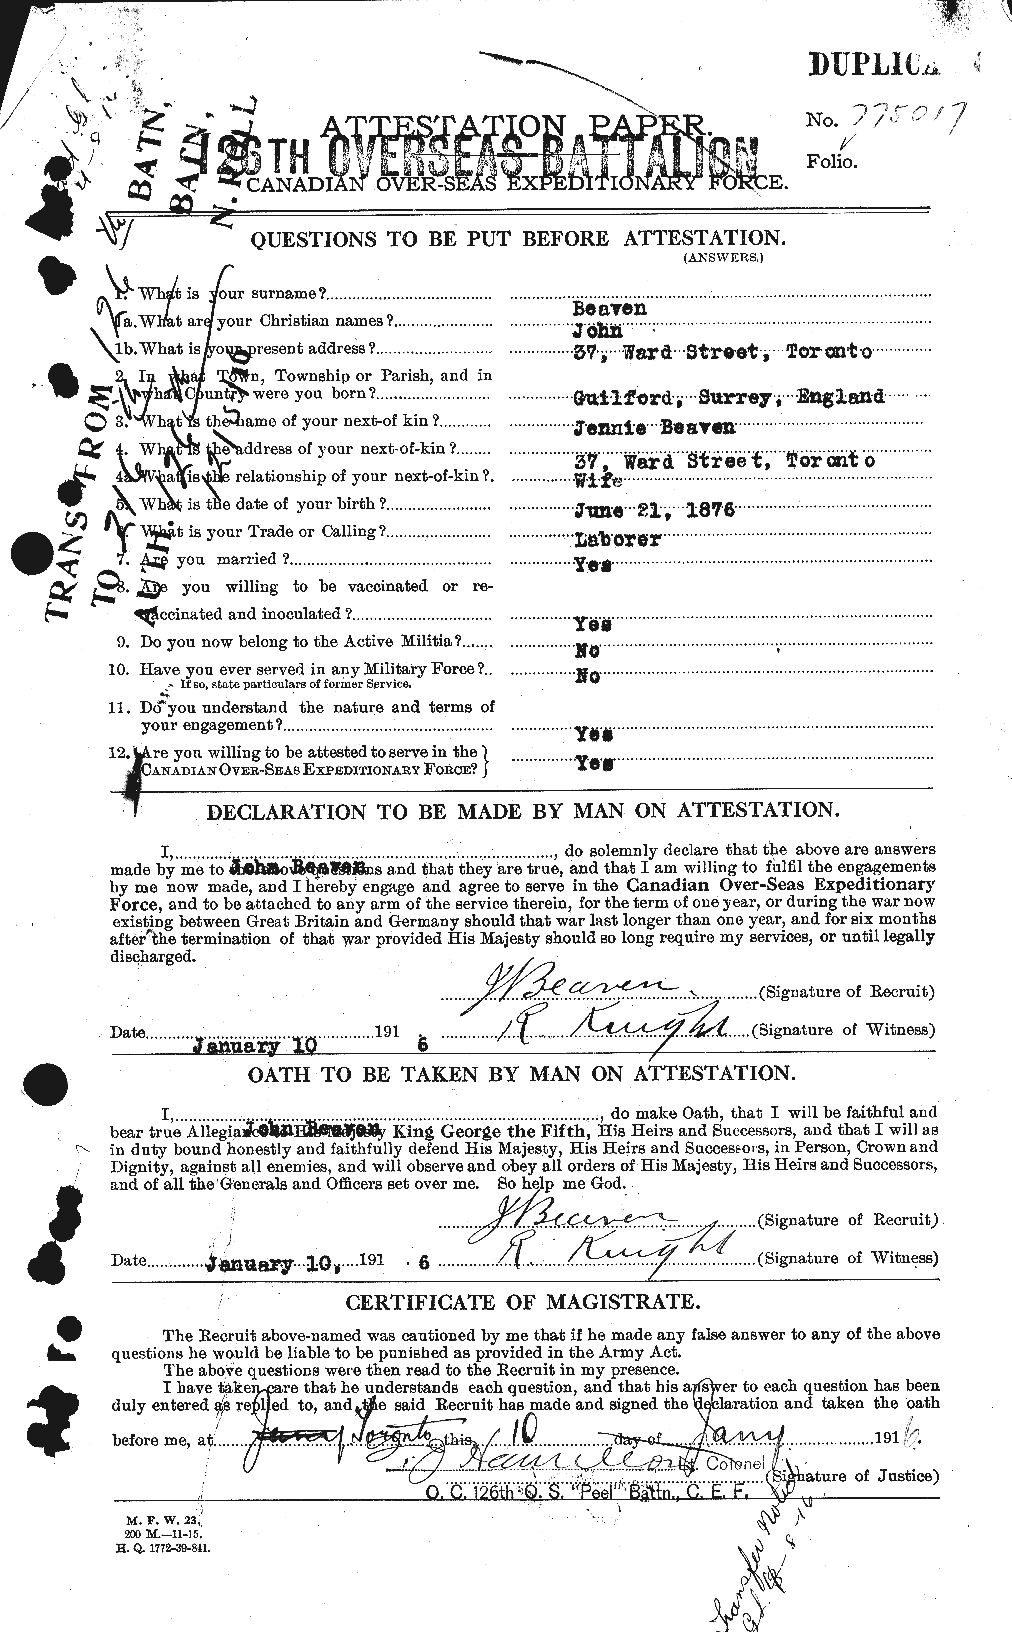 Personnel Records of the First World War - CEF 231908a